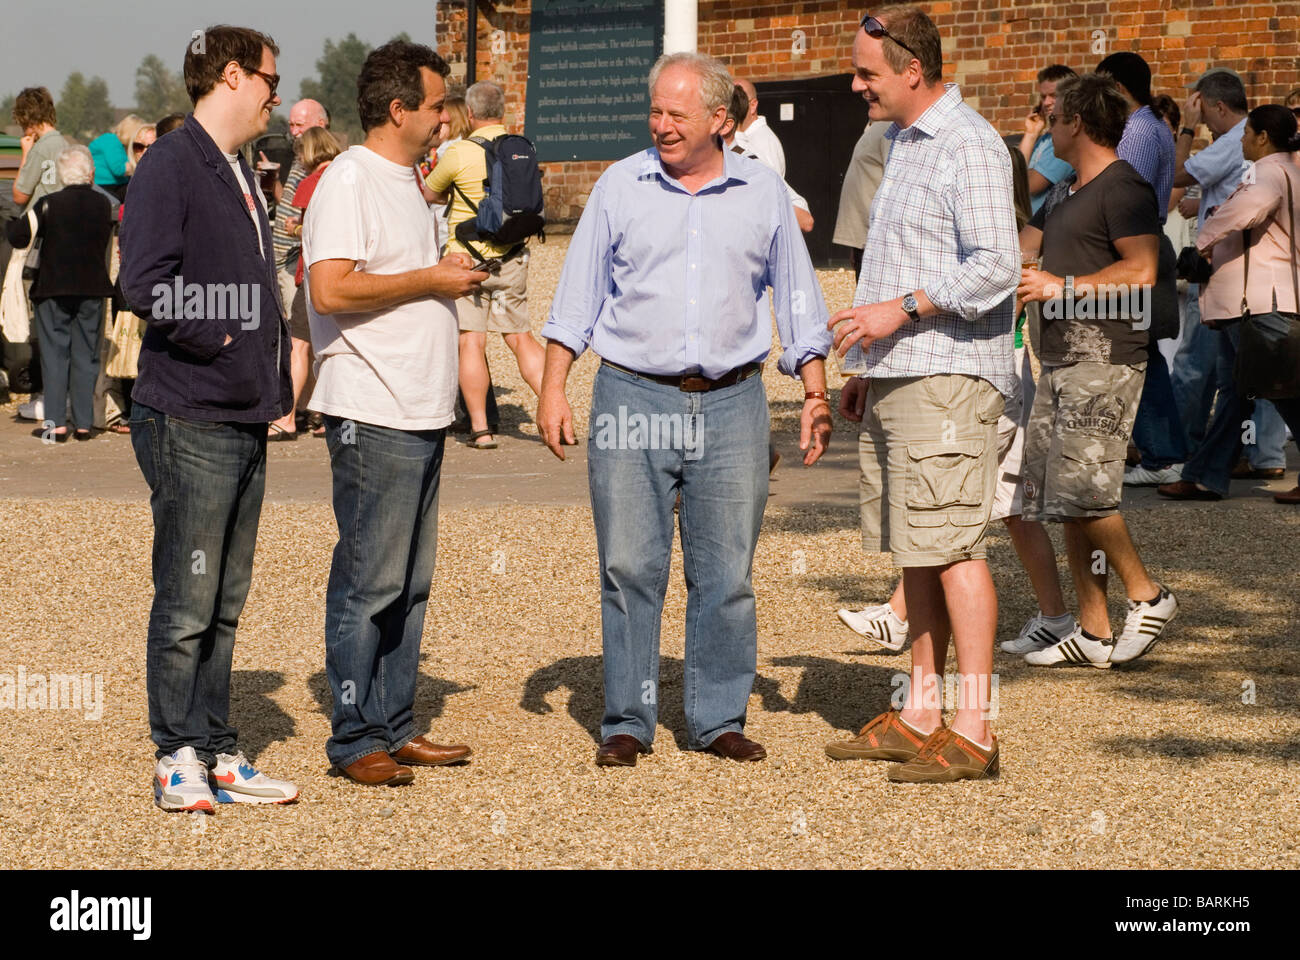 Tom Parker Bowles Mark Hix and Matthew Fort Aldeburgh Food Fair at Snape Maltings Suffolk UK The three chefs   2009 2000s HOMER SYKES Stock Photo